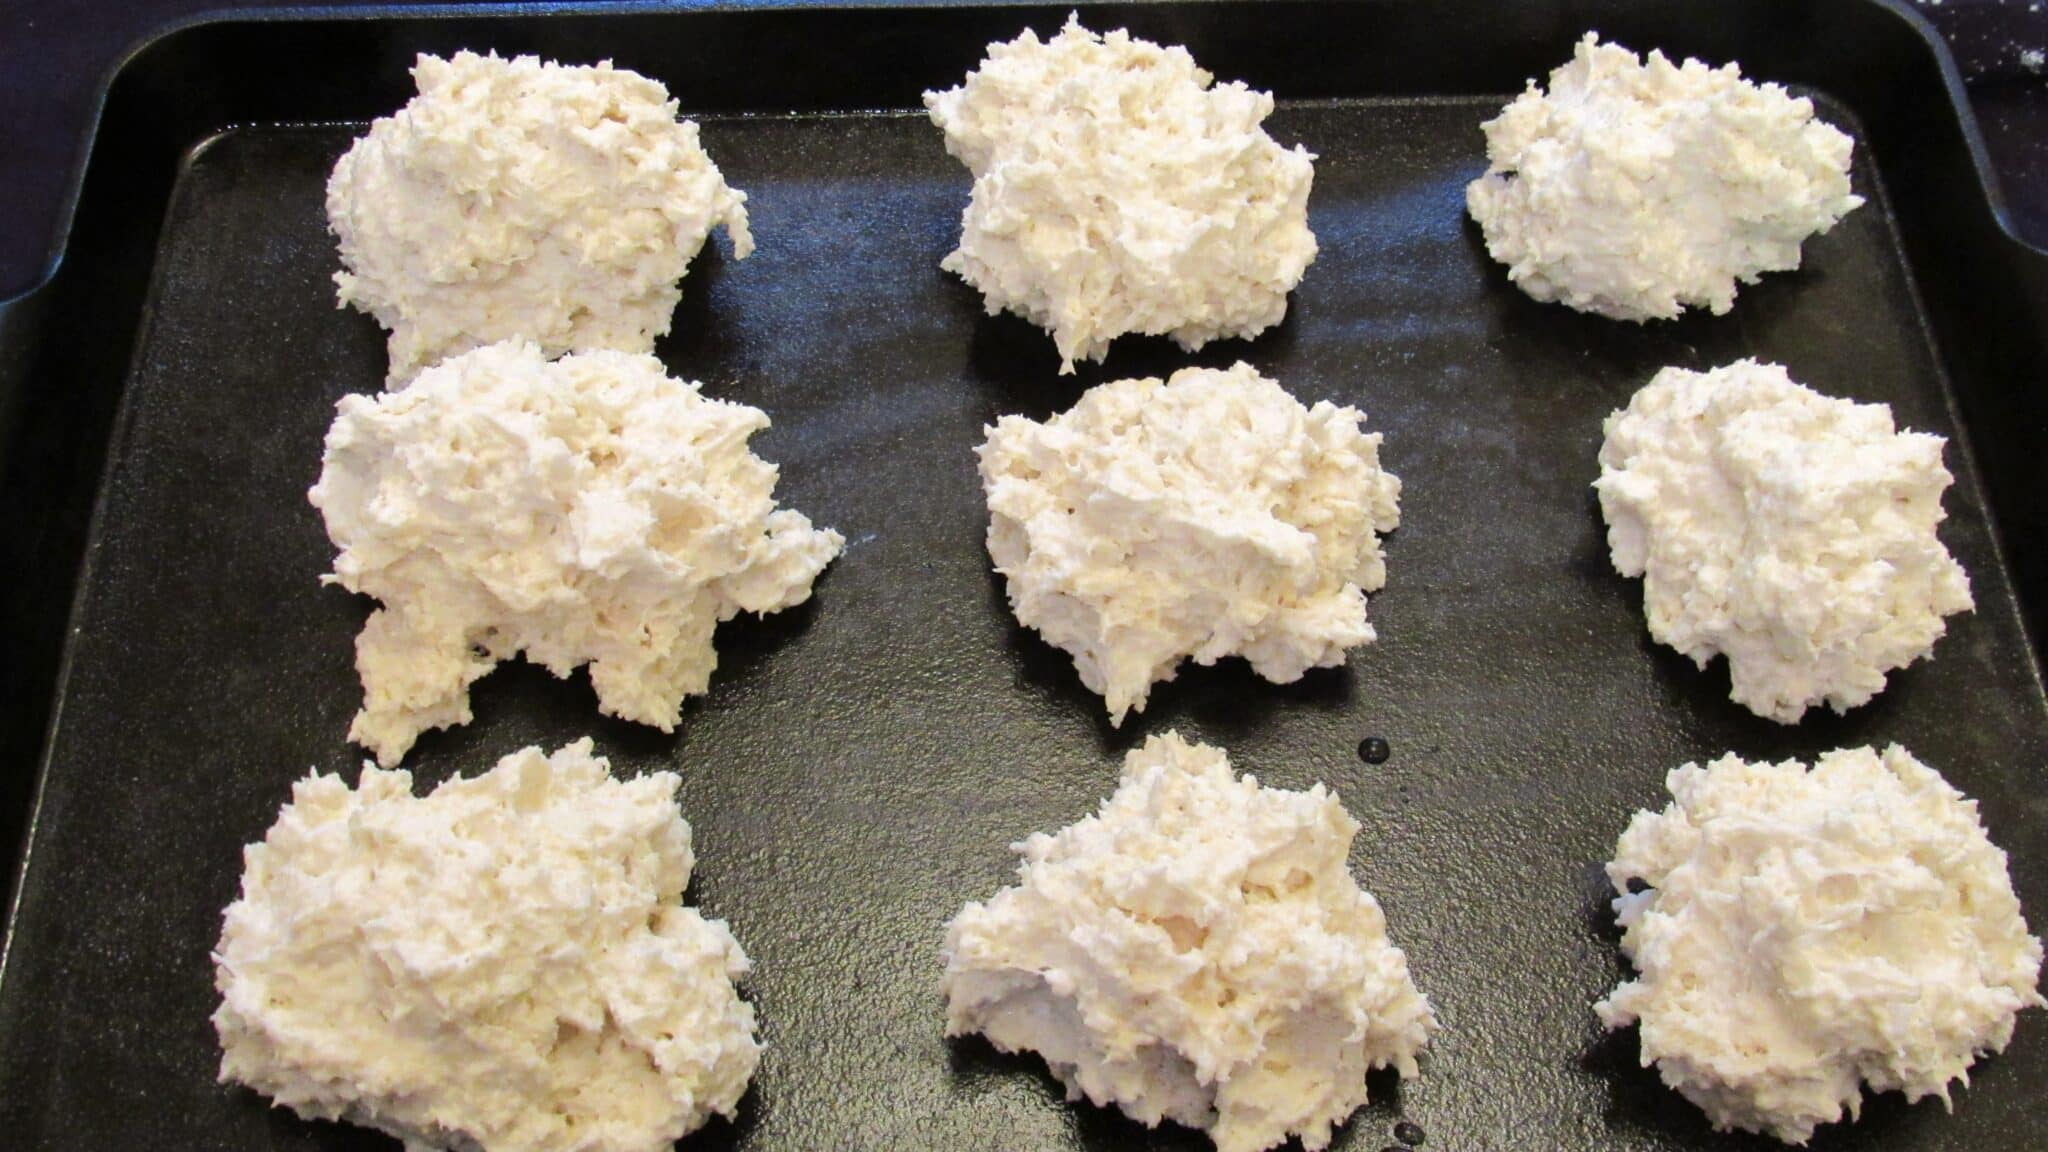 Yogurt biscuits batter is divided into nine pieces on a sheet pan, ready to be baked.